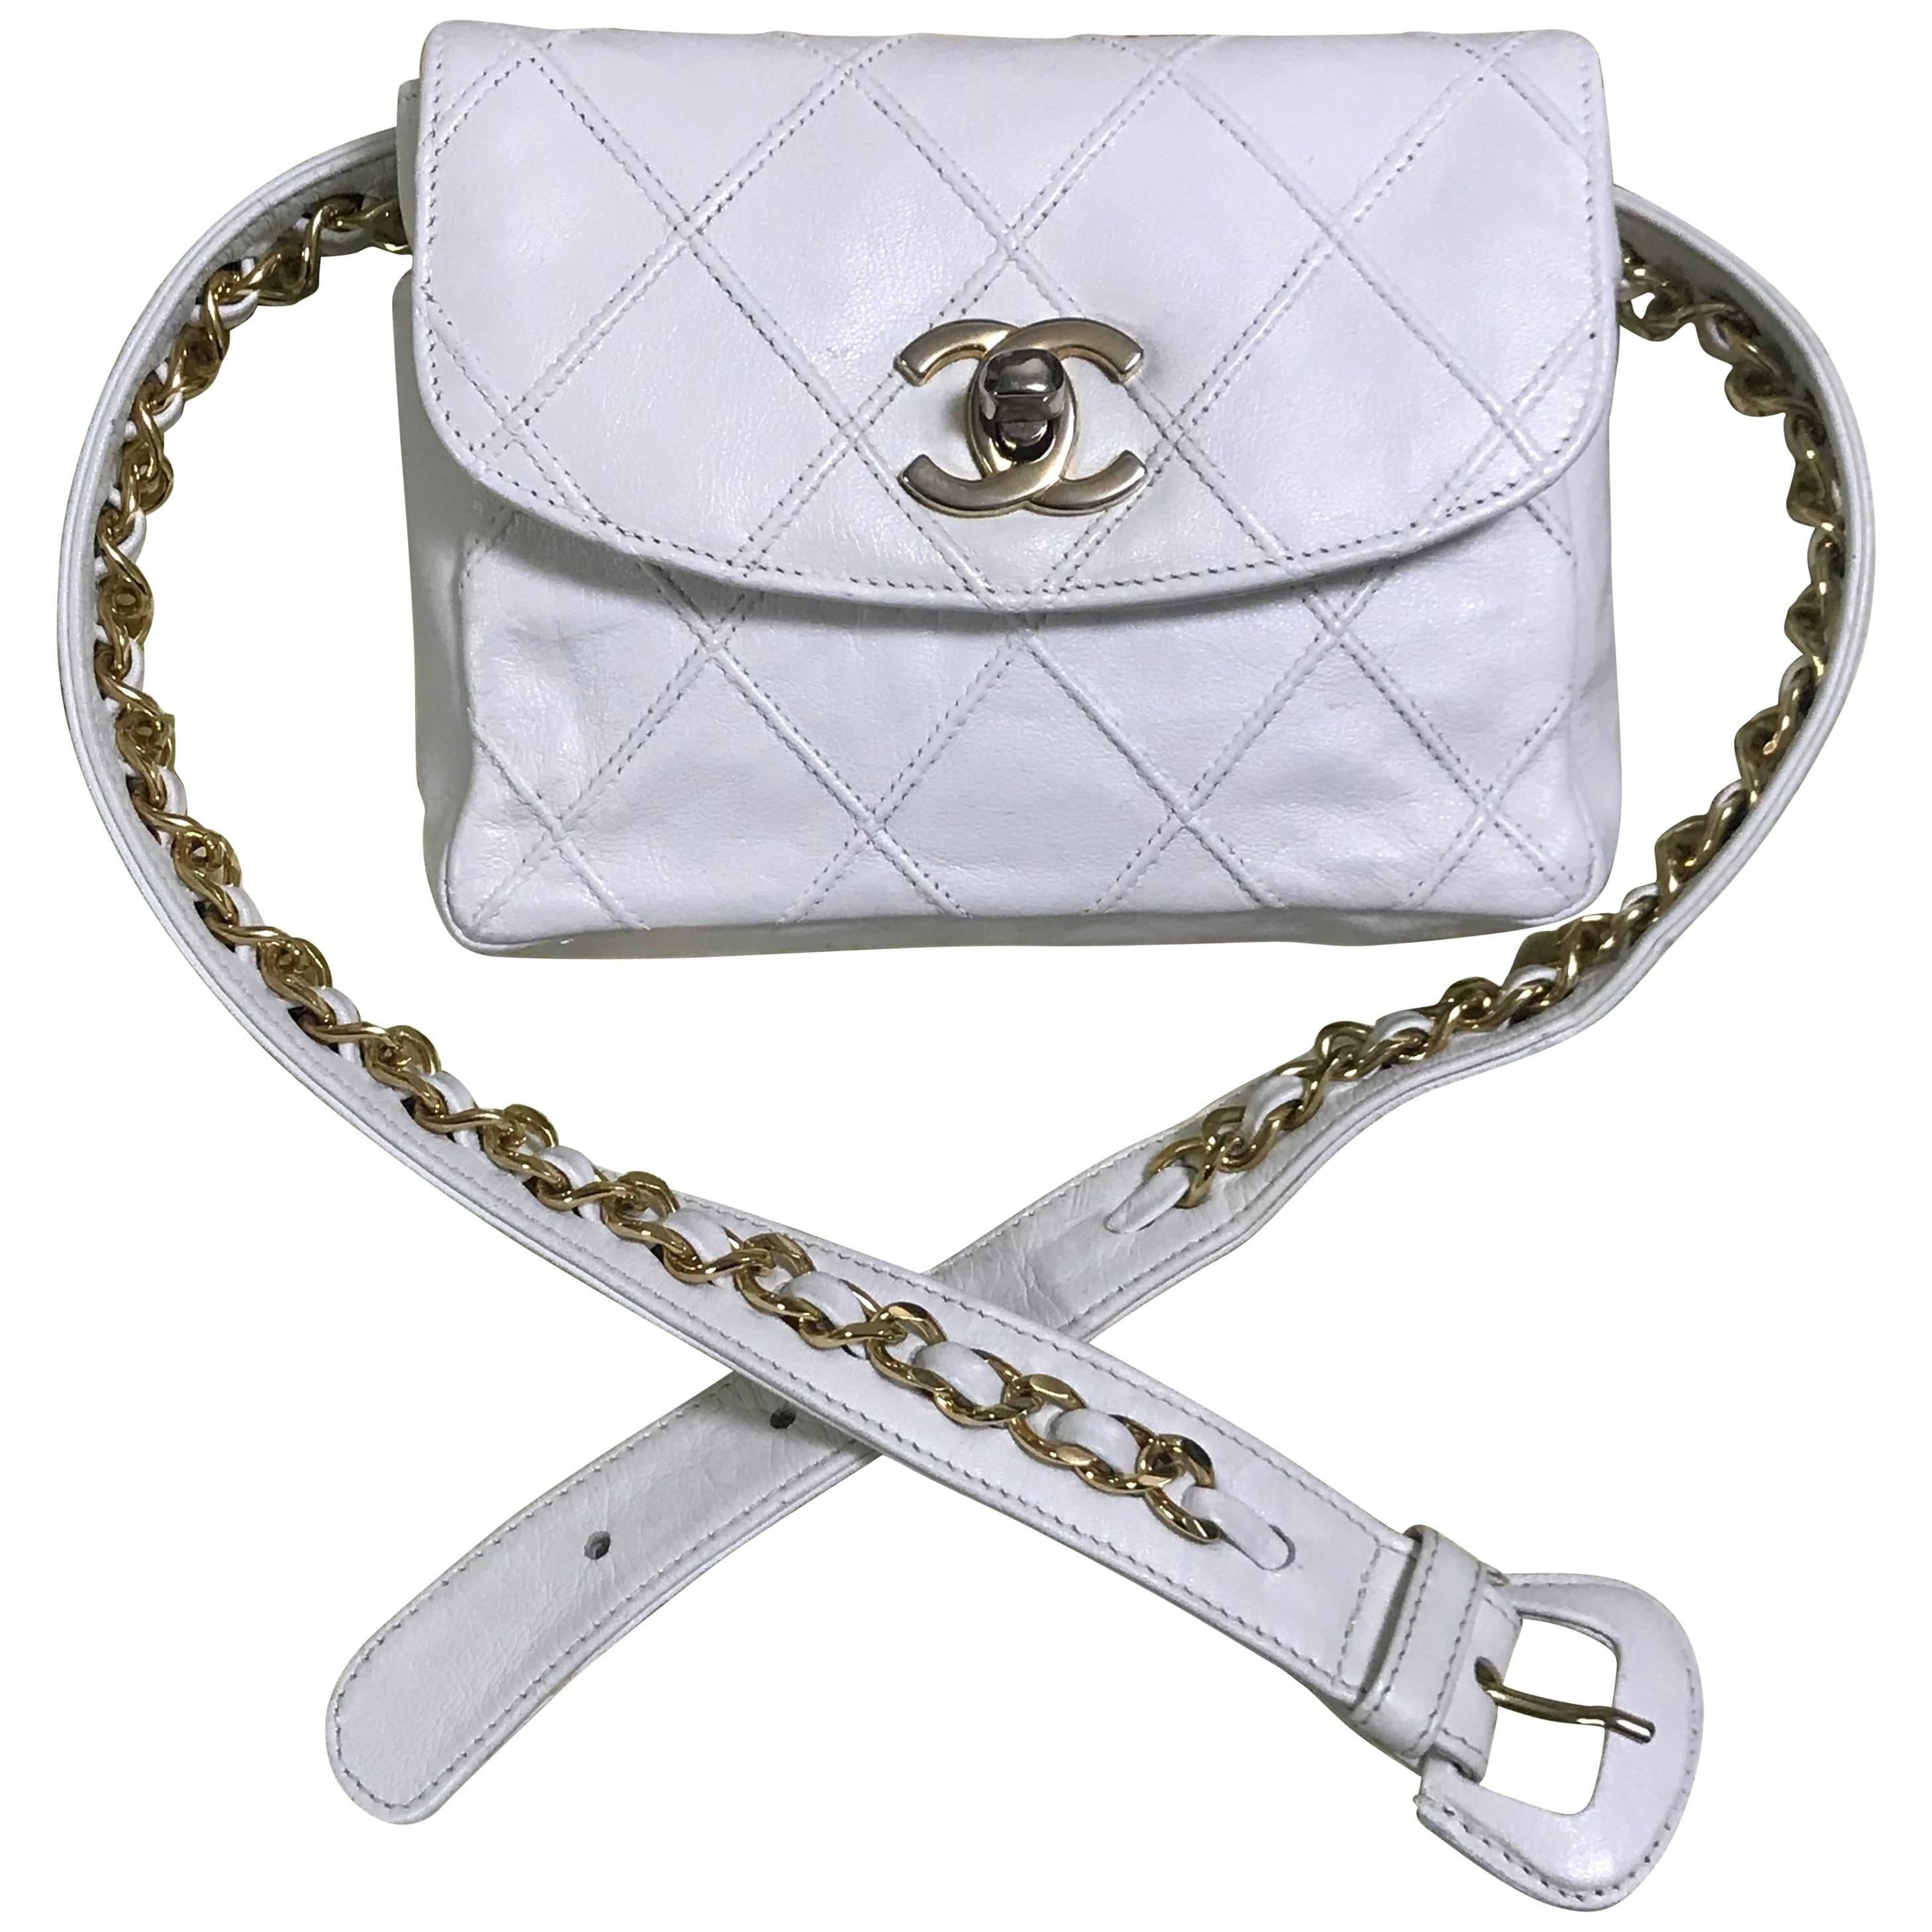 Chanel Vintage white leather waist purse, fanny pack, hip bag with golden CC 